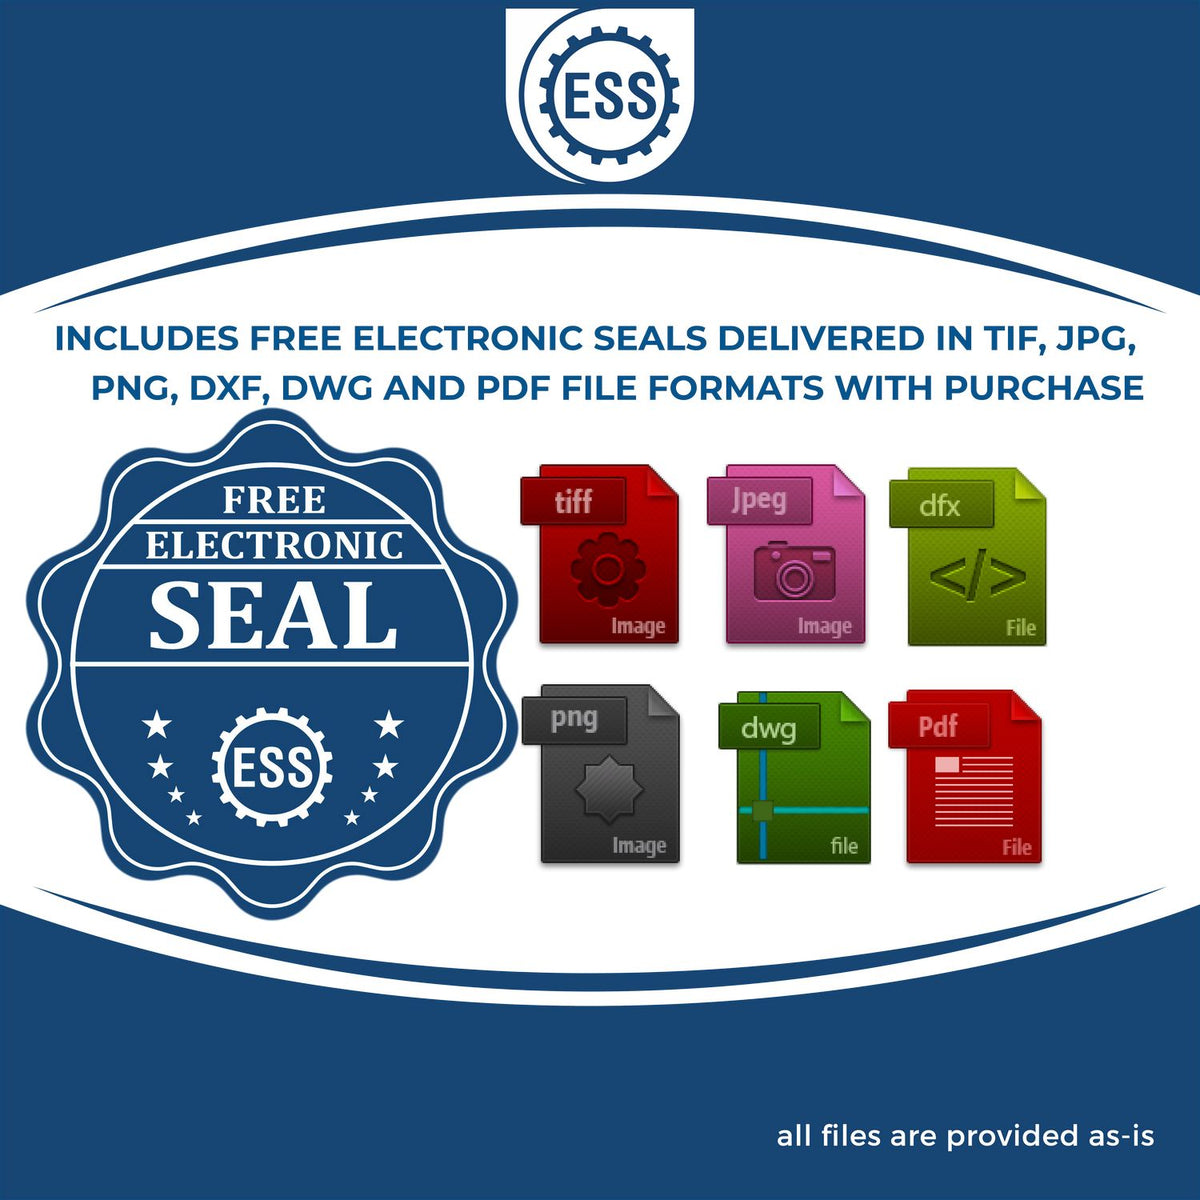 An infographic for the free electronic seal for the Self-Inking State Seal Michigan Notary Stamp illustrating the different file type icons such as DXF, DWG, TIF, JPG and PNG.